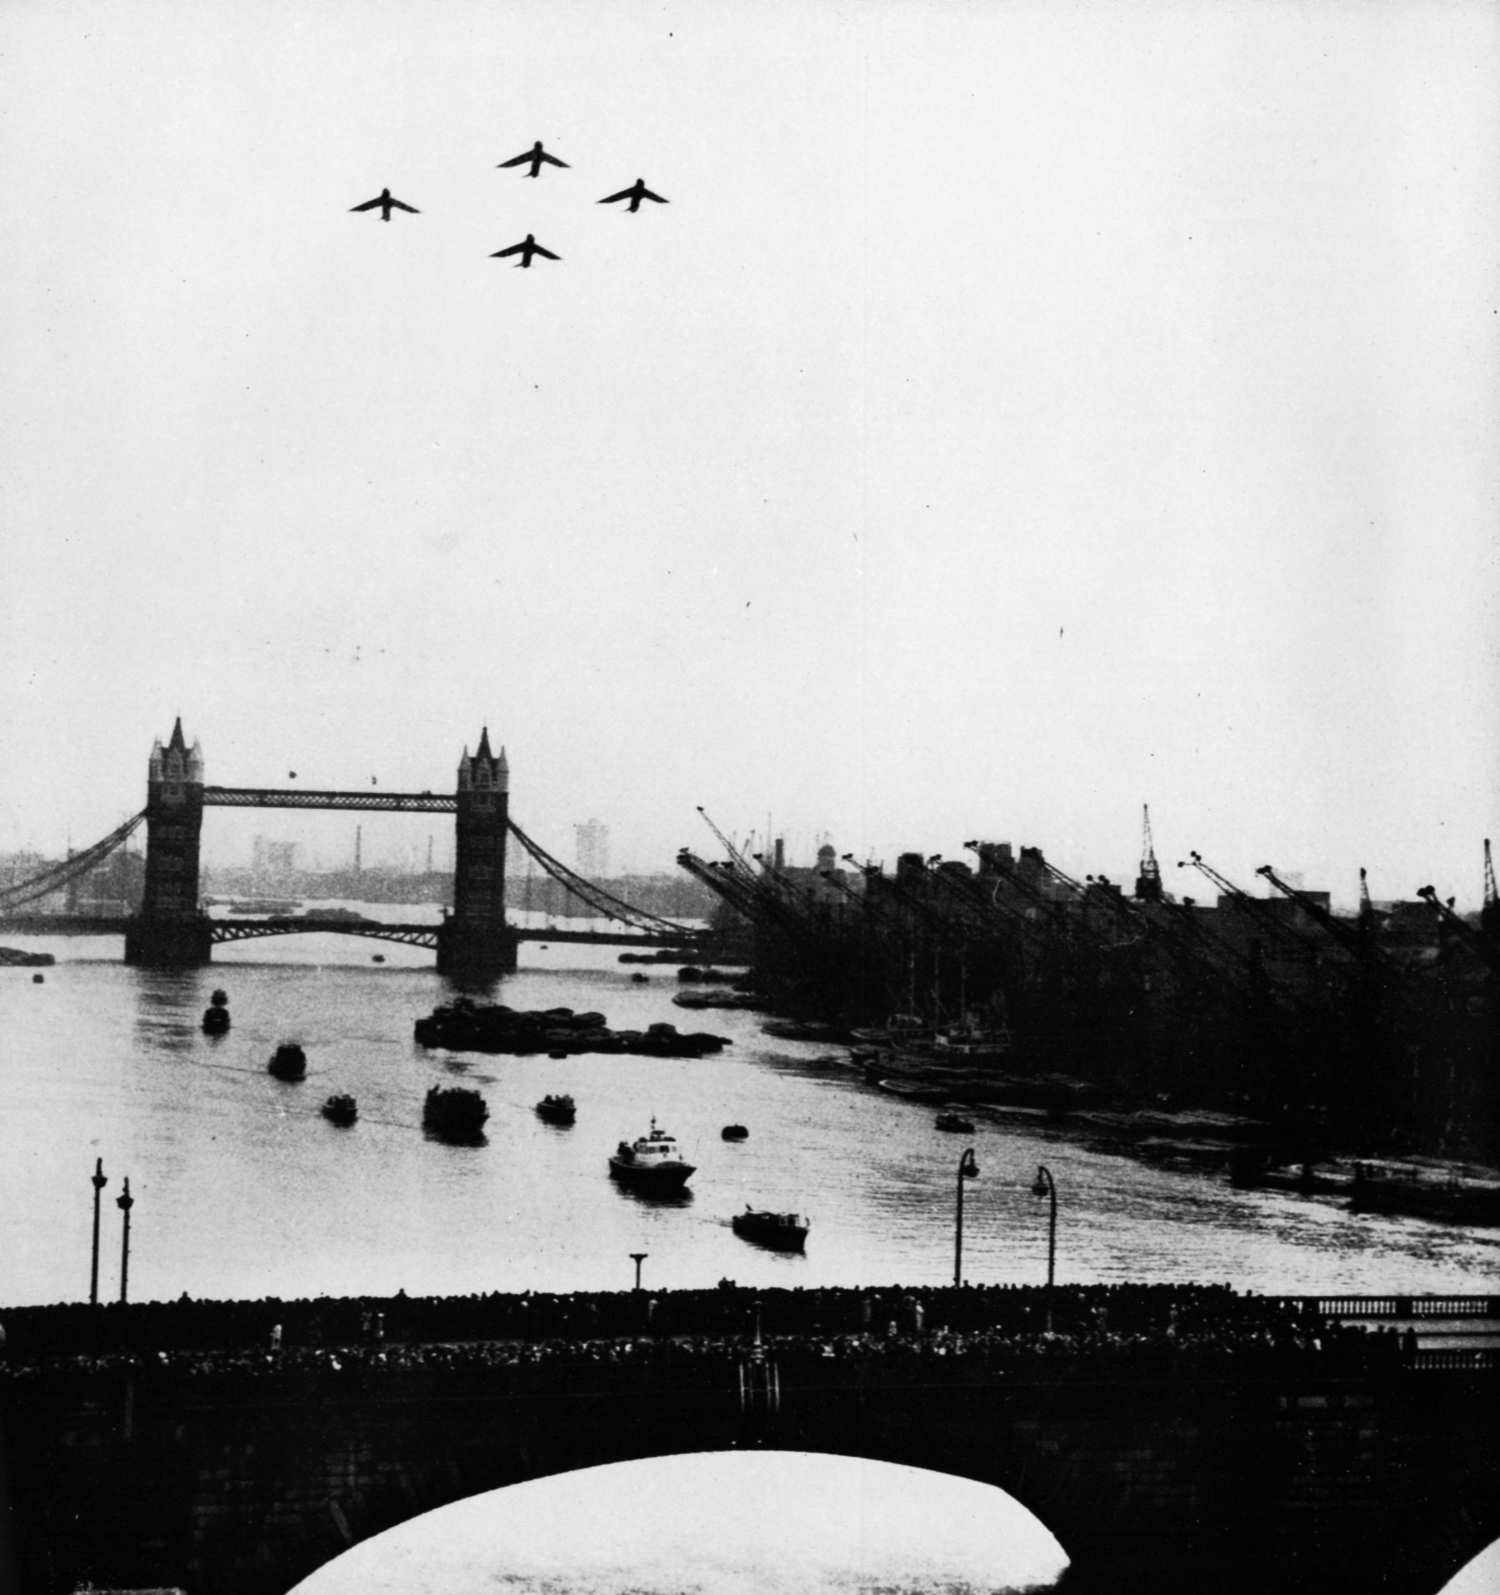 RAF fly-past over Tower Bridge